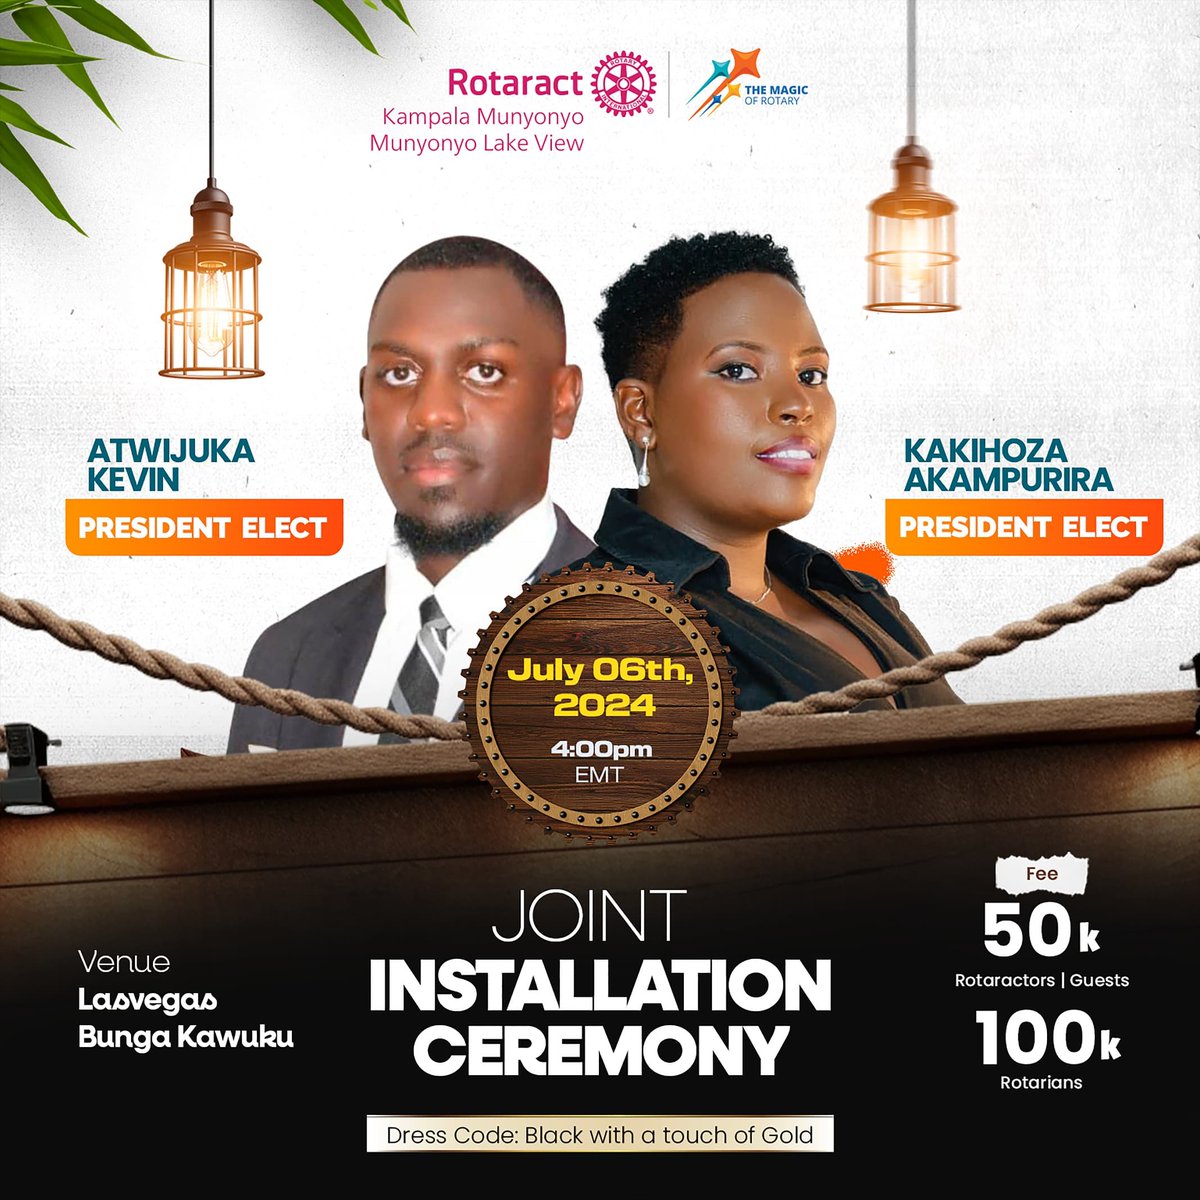 It's yet another time when the Spirit of Leadership haunts me. So let's come through and support this gallant joint installation which will coincide with a launch of a signature project to renovate Kajunju Primary School in Ruhinda Subcounty in Rukungiri District.
@AnitahAmong